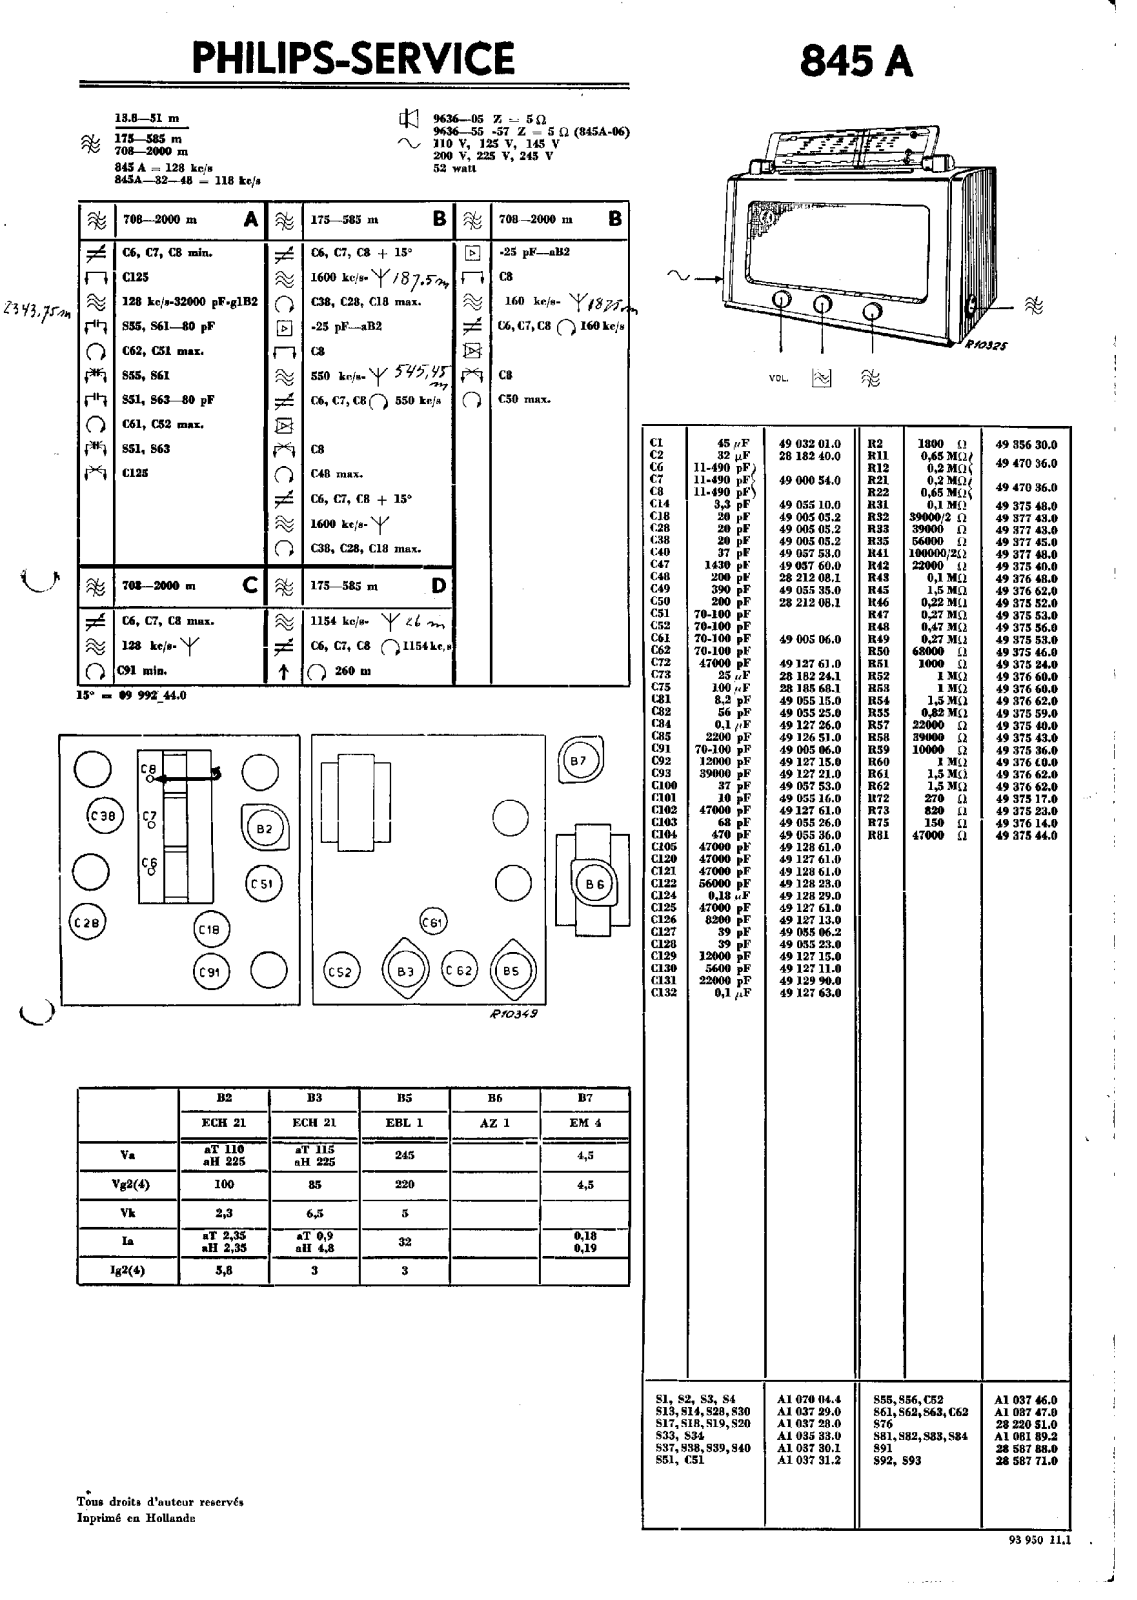 Philips 845-A Service Manual